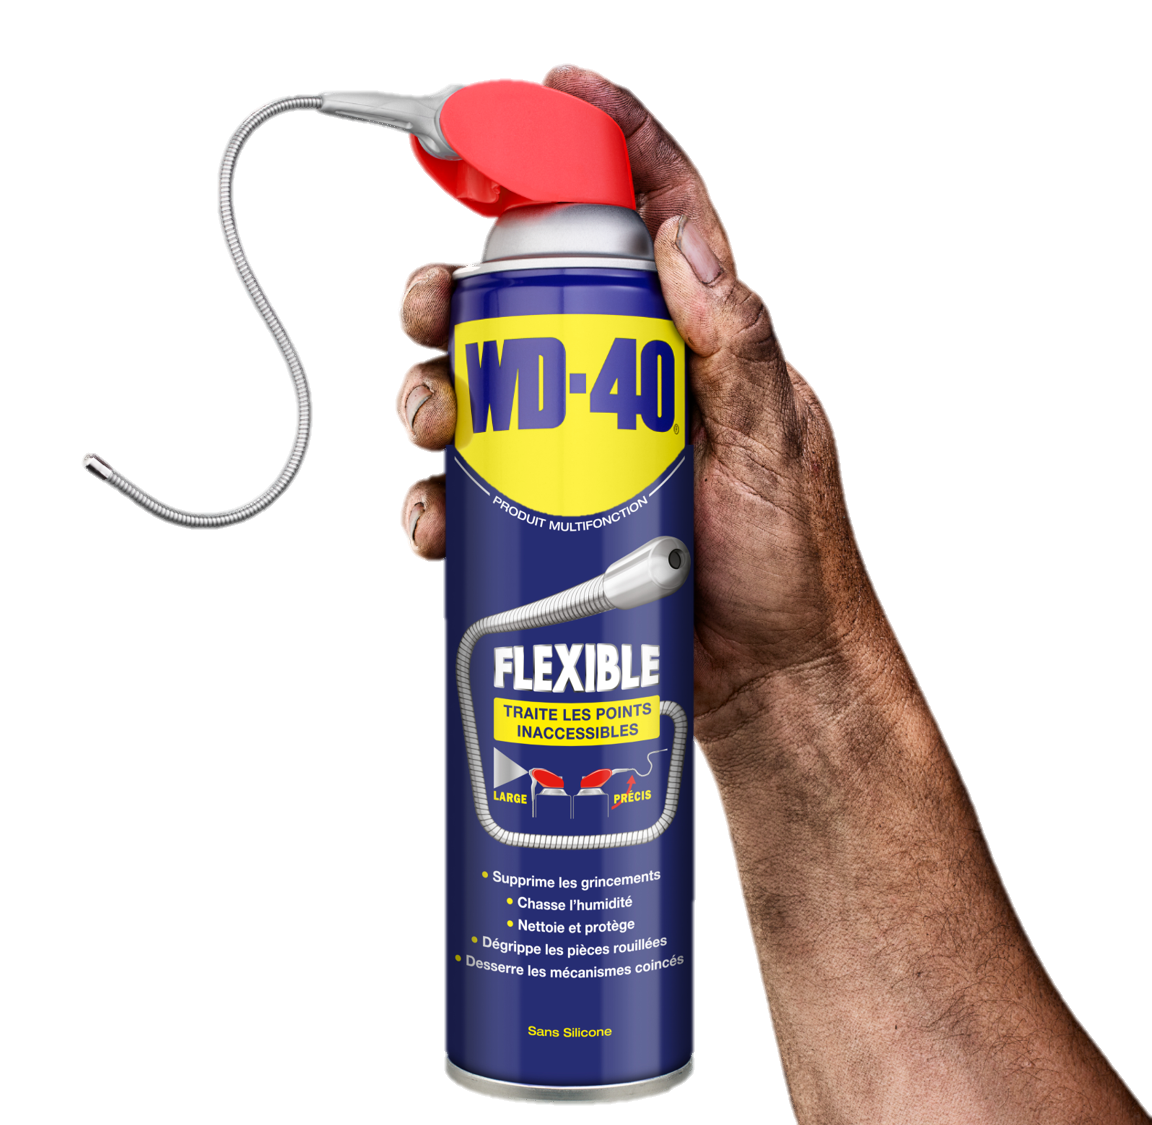 WD-40 flexible 400мл. Смазка многоцелевая WD 40 400мл. Смазка проникающая WD-40 400 мл. Flexible. Смазка проникающая «WD-40» 400мл.. Лучше вд 40